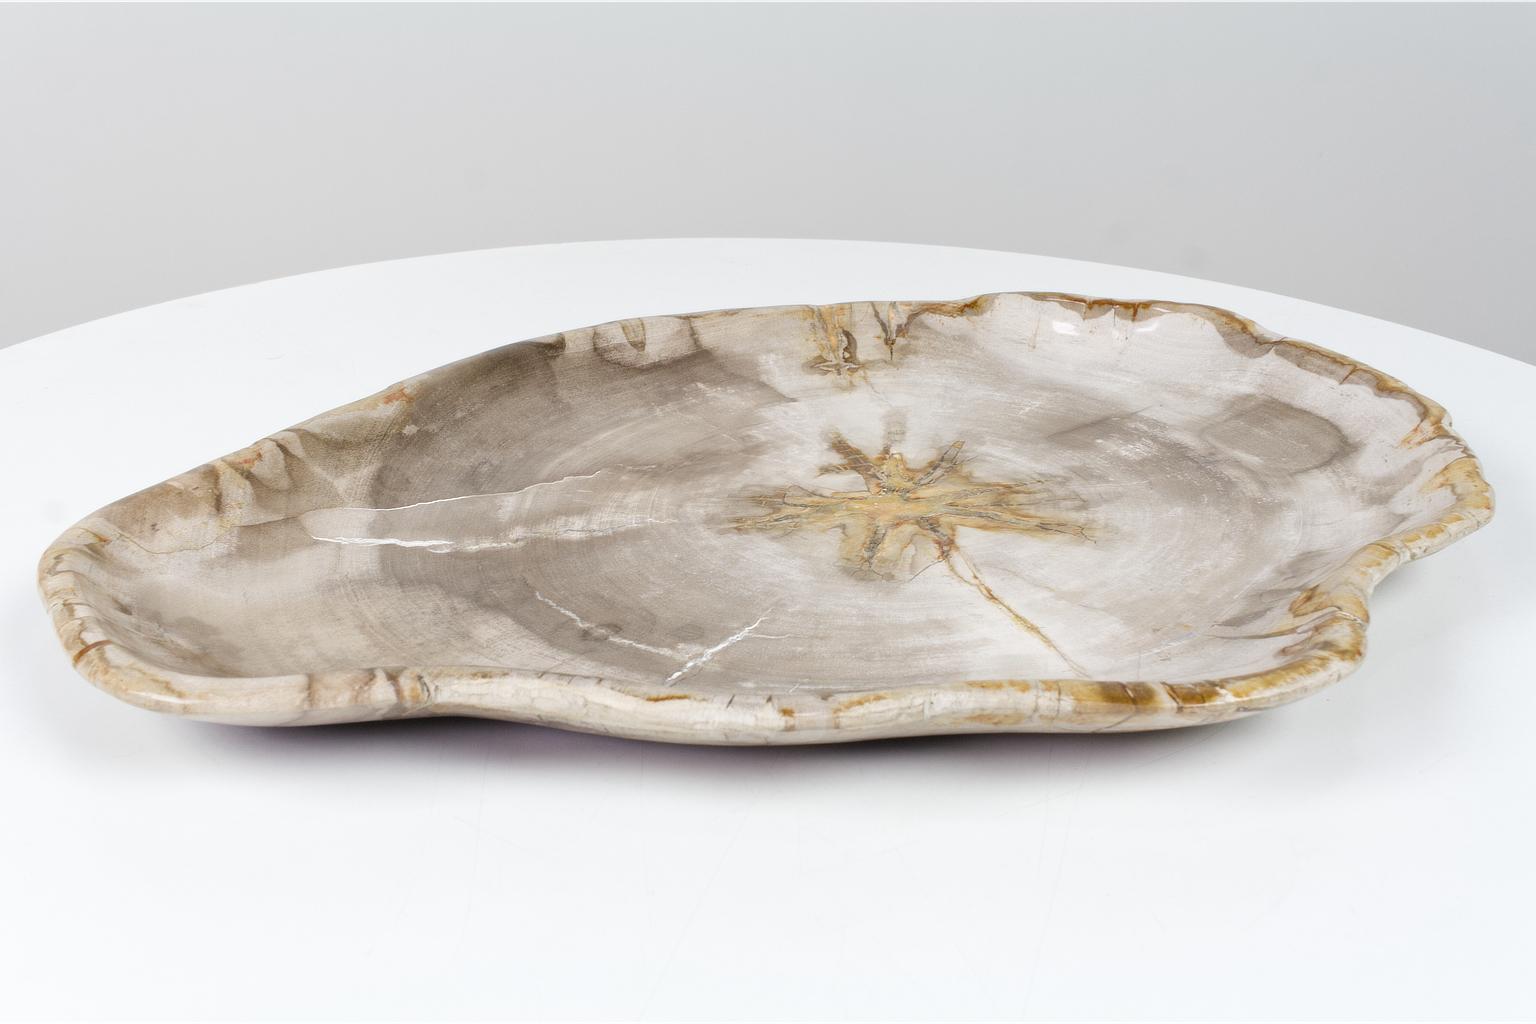 A large and smooth sanded petrified wooden object or organically shaped plate. The high gloss finish is a result of smooth sanding the item. This unique and ancient object in beige tones is of organic origin and has the original organic shape.